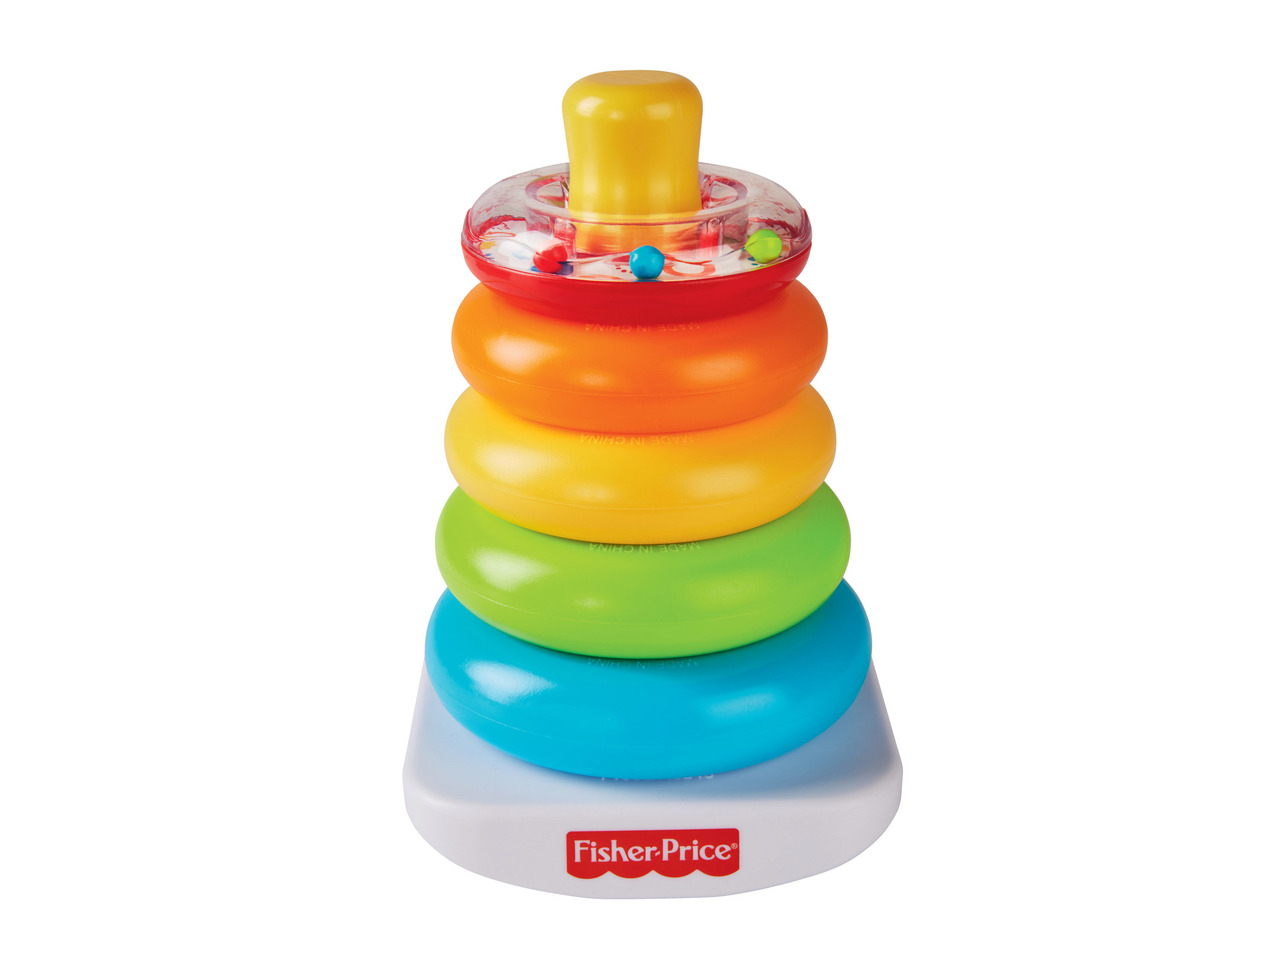 FISHER-PRICE Baby Toys Assortment